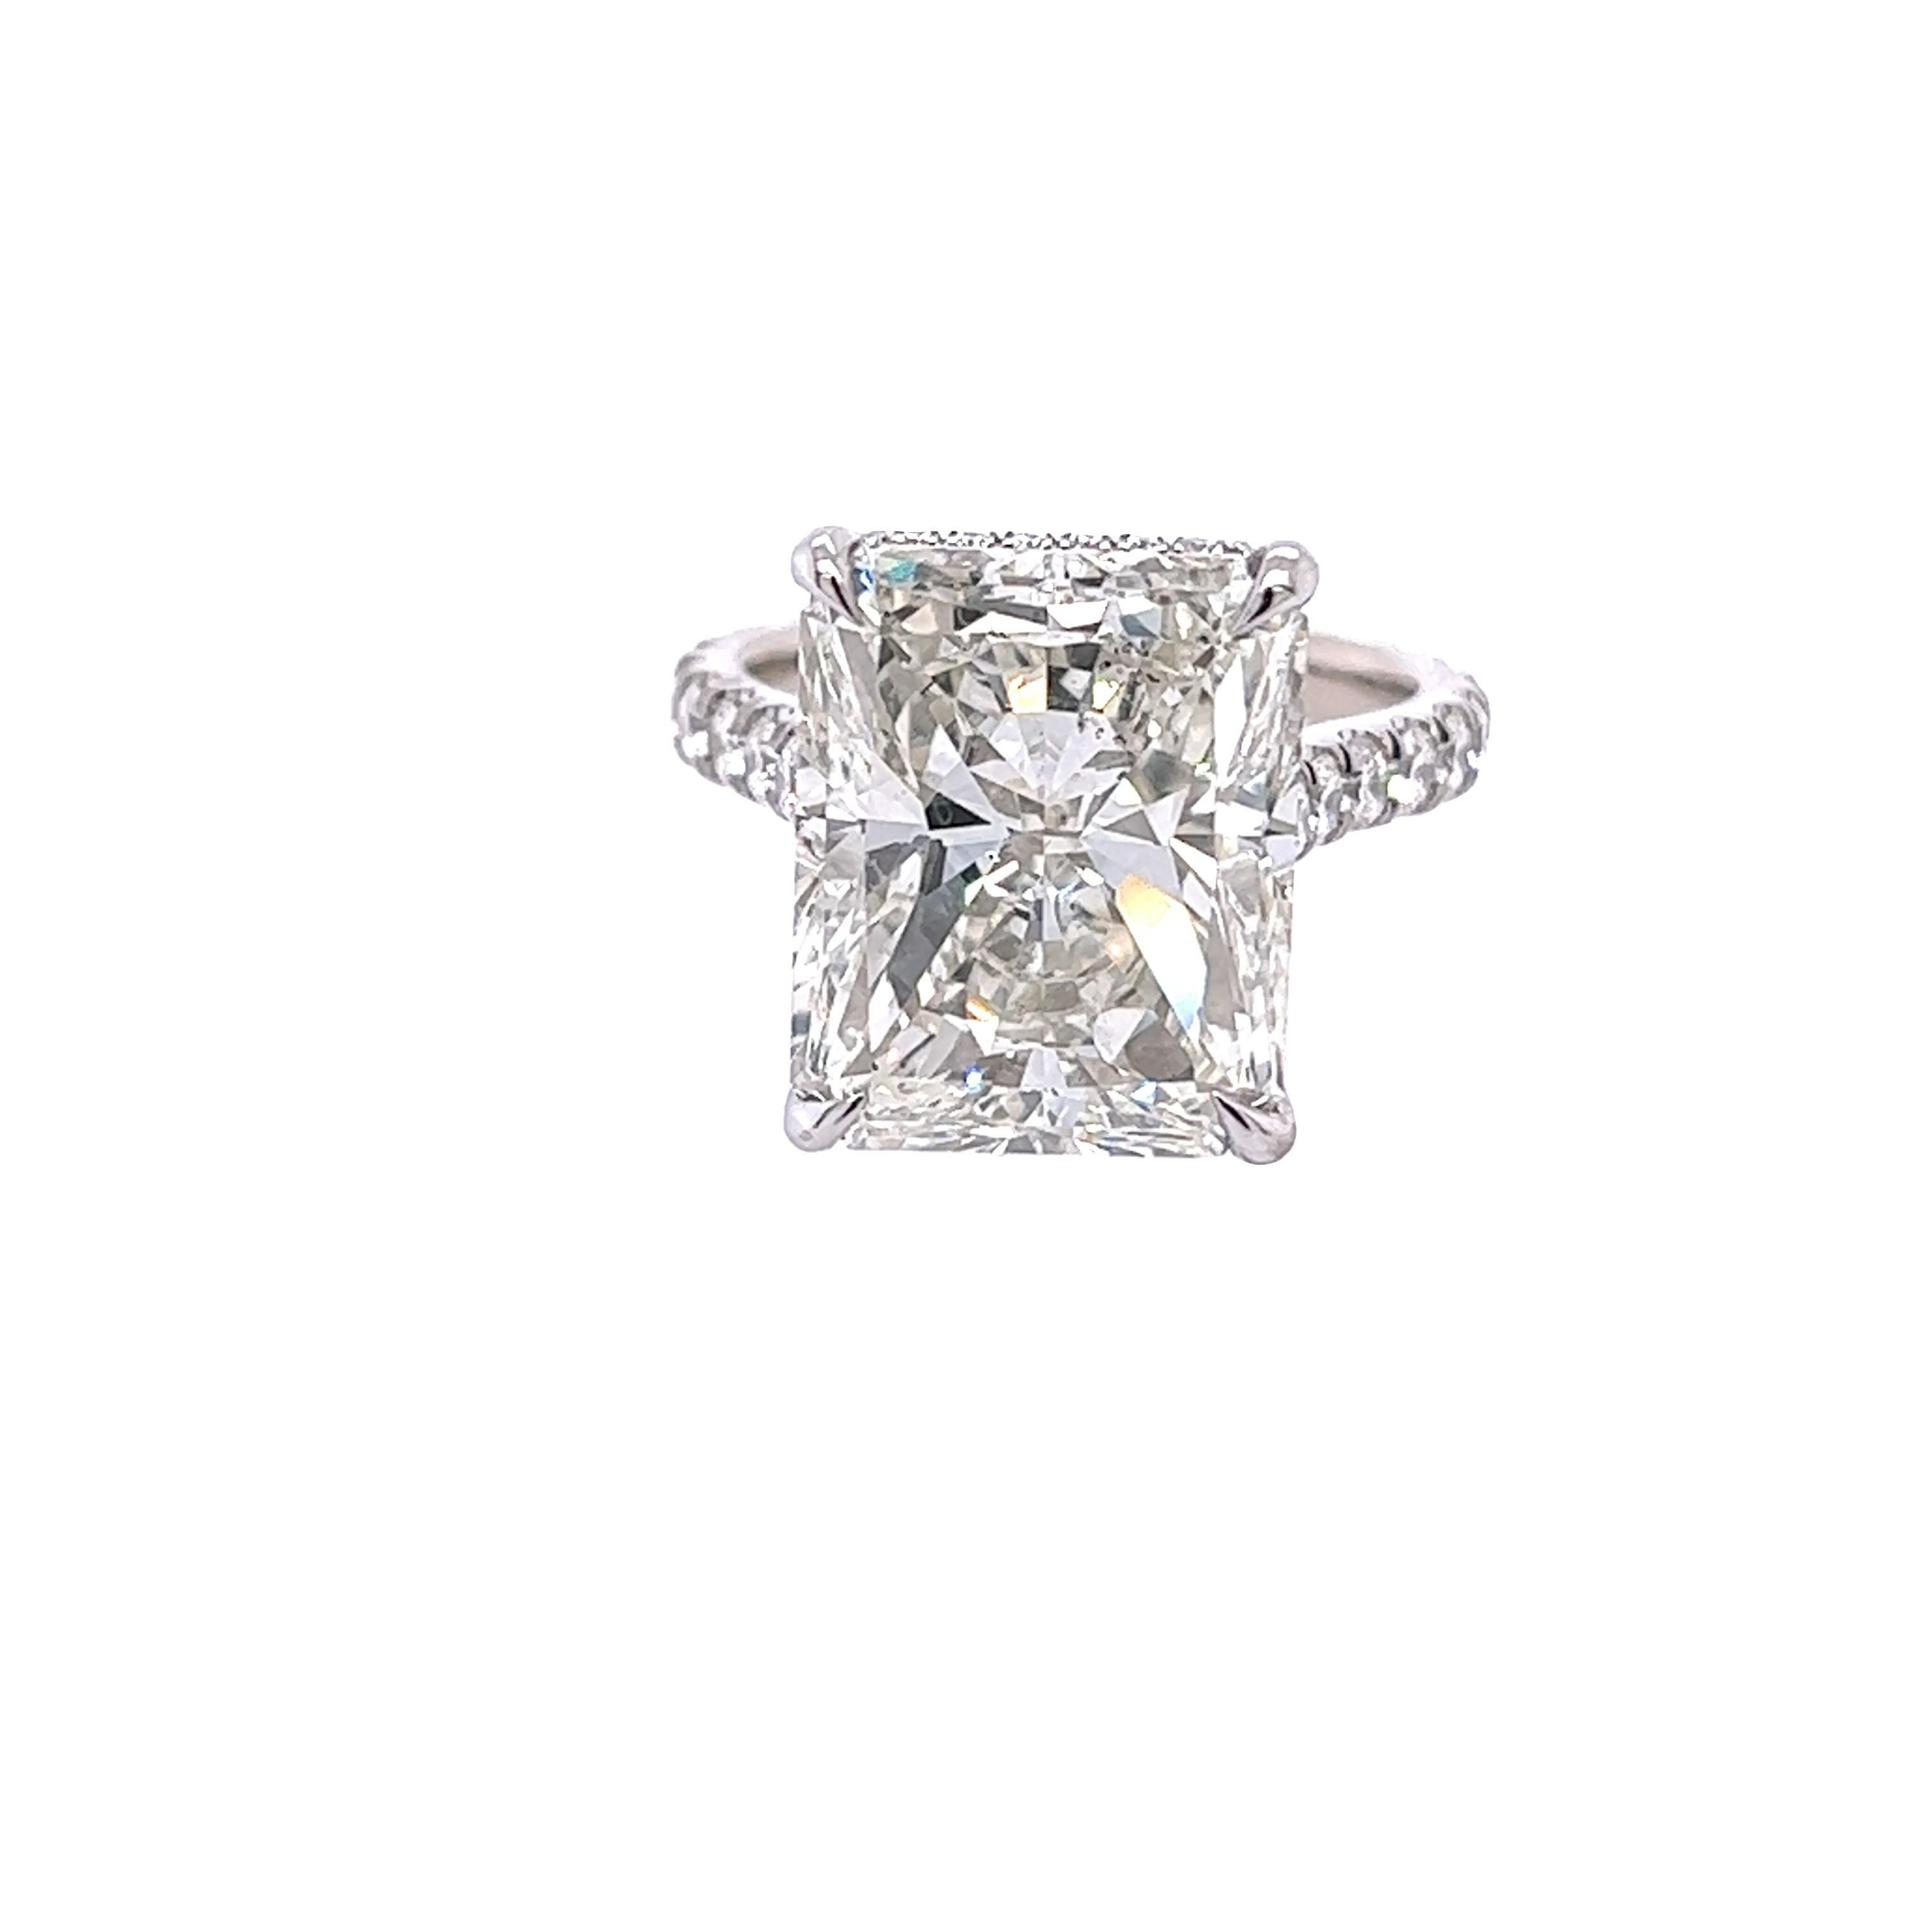 Rosenberg Diamonds & Co. 10.09 carat Radiant cut I color SI1 clarity is accompanied by a GIA certificate. This Exceptional elongated Radiant cut is full of brilliance and it is set in a handmade platnium setting. This ring continues its elegance